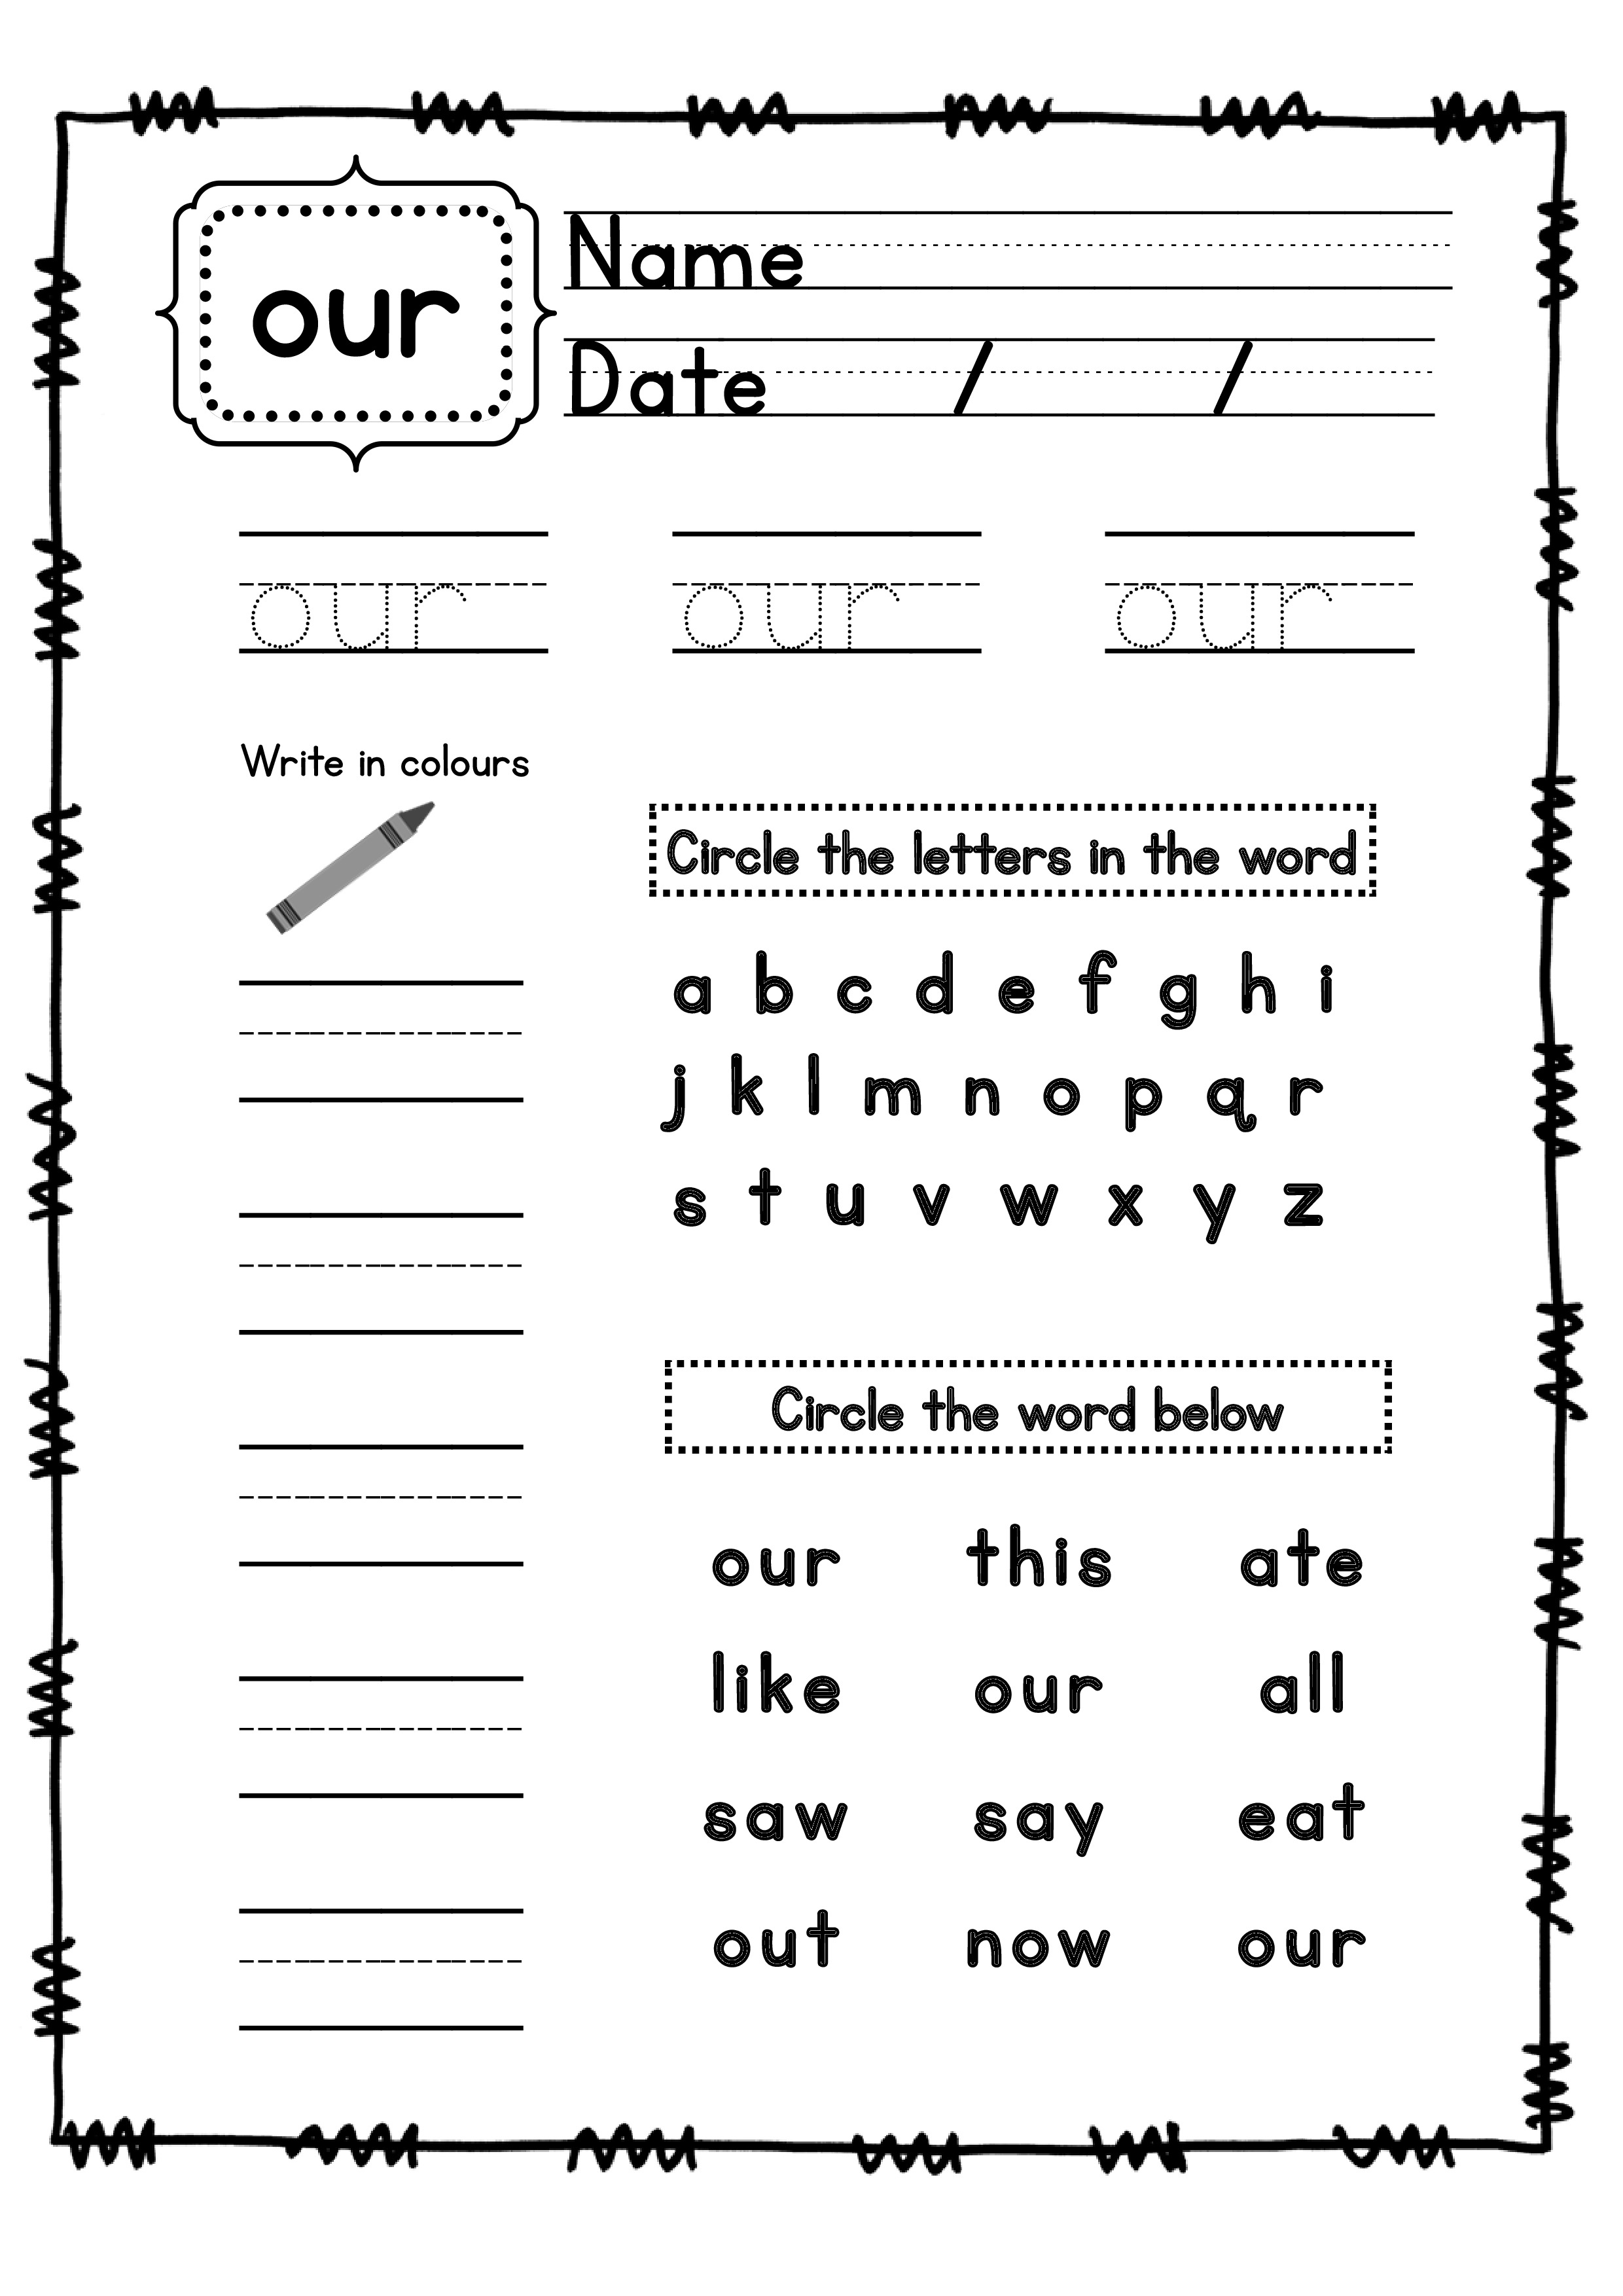 word 52 writing on worksheets the includes the sight word  primer sight all pdf words word worksheets